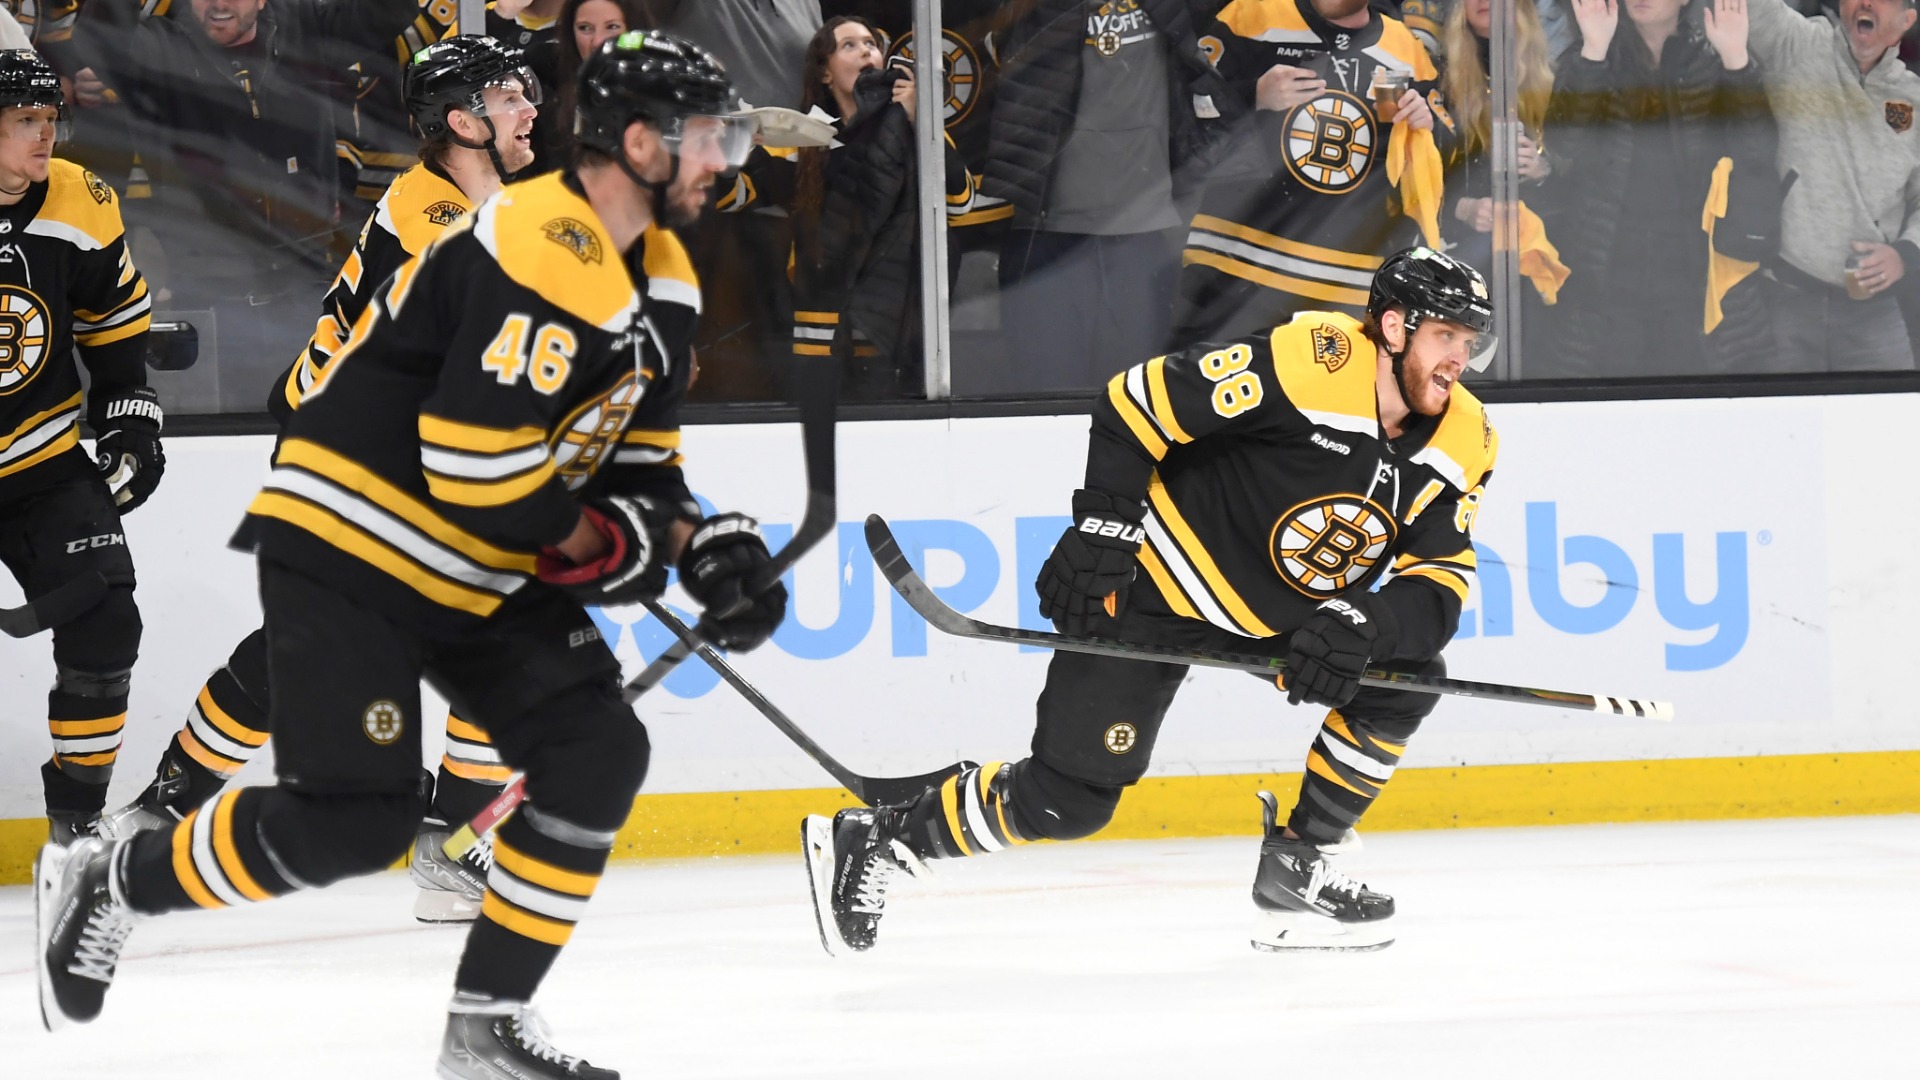 NESN - The Bruins 2022-23 Broadcast Schedule is finally here